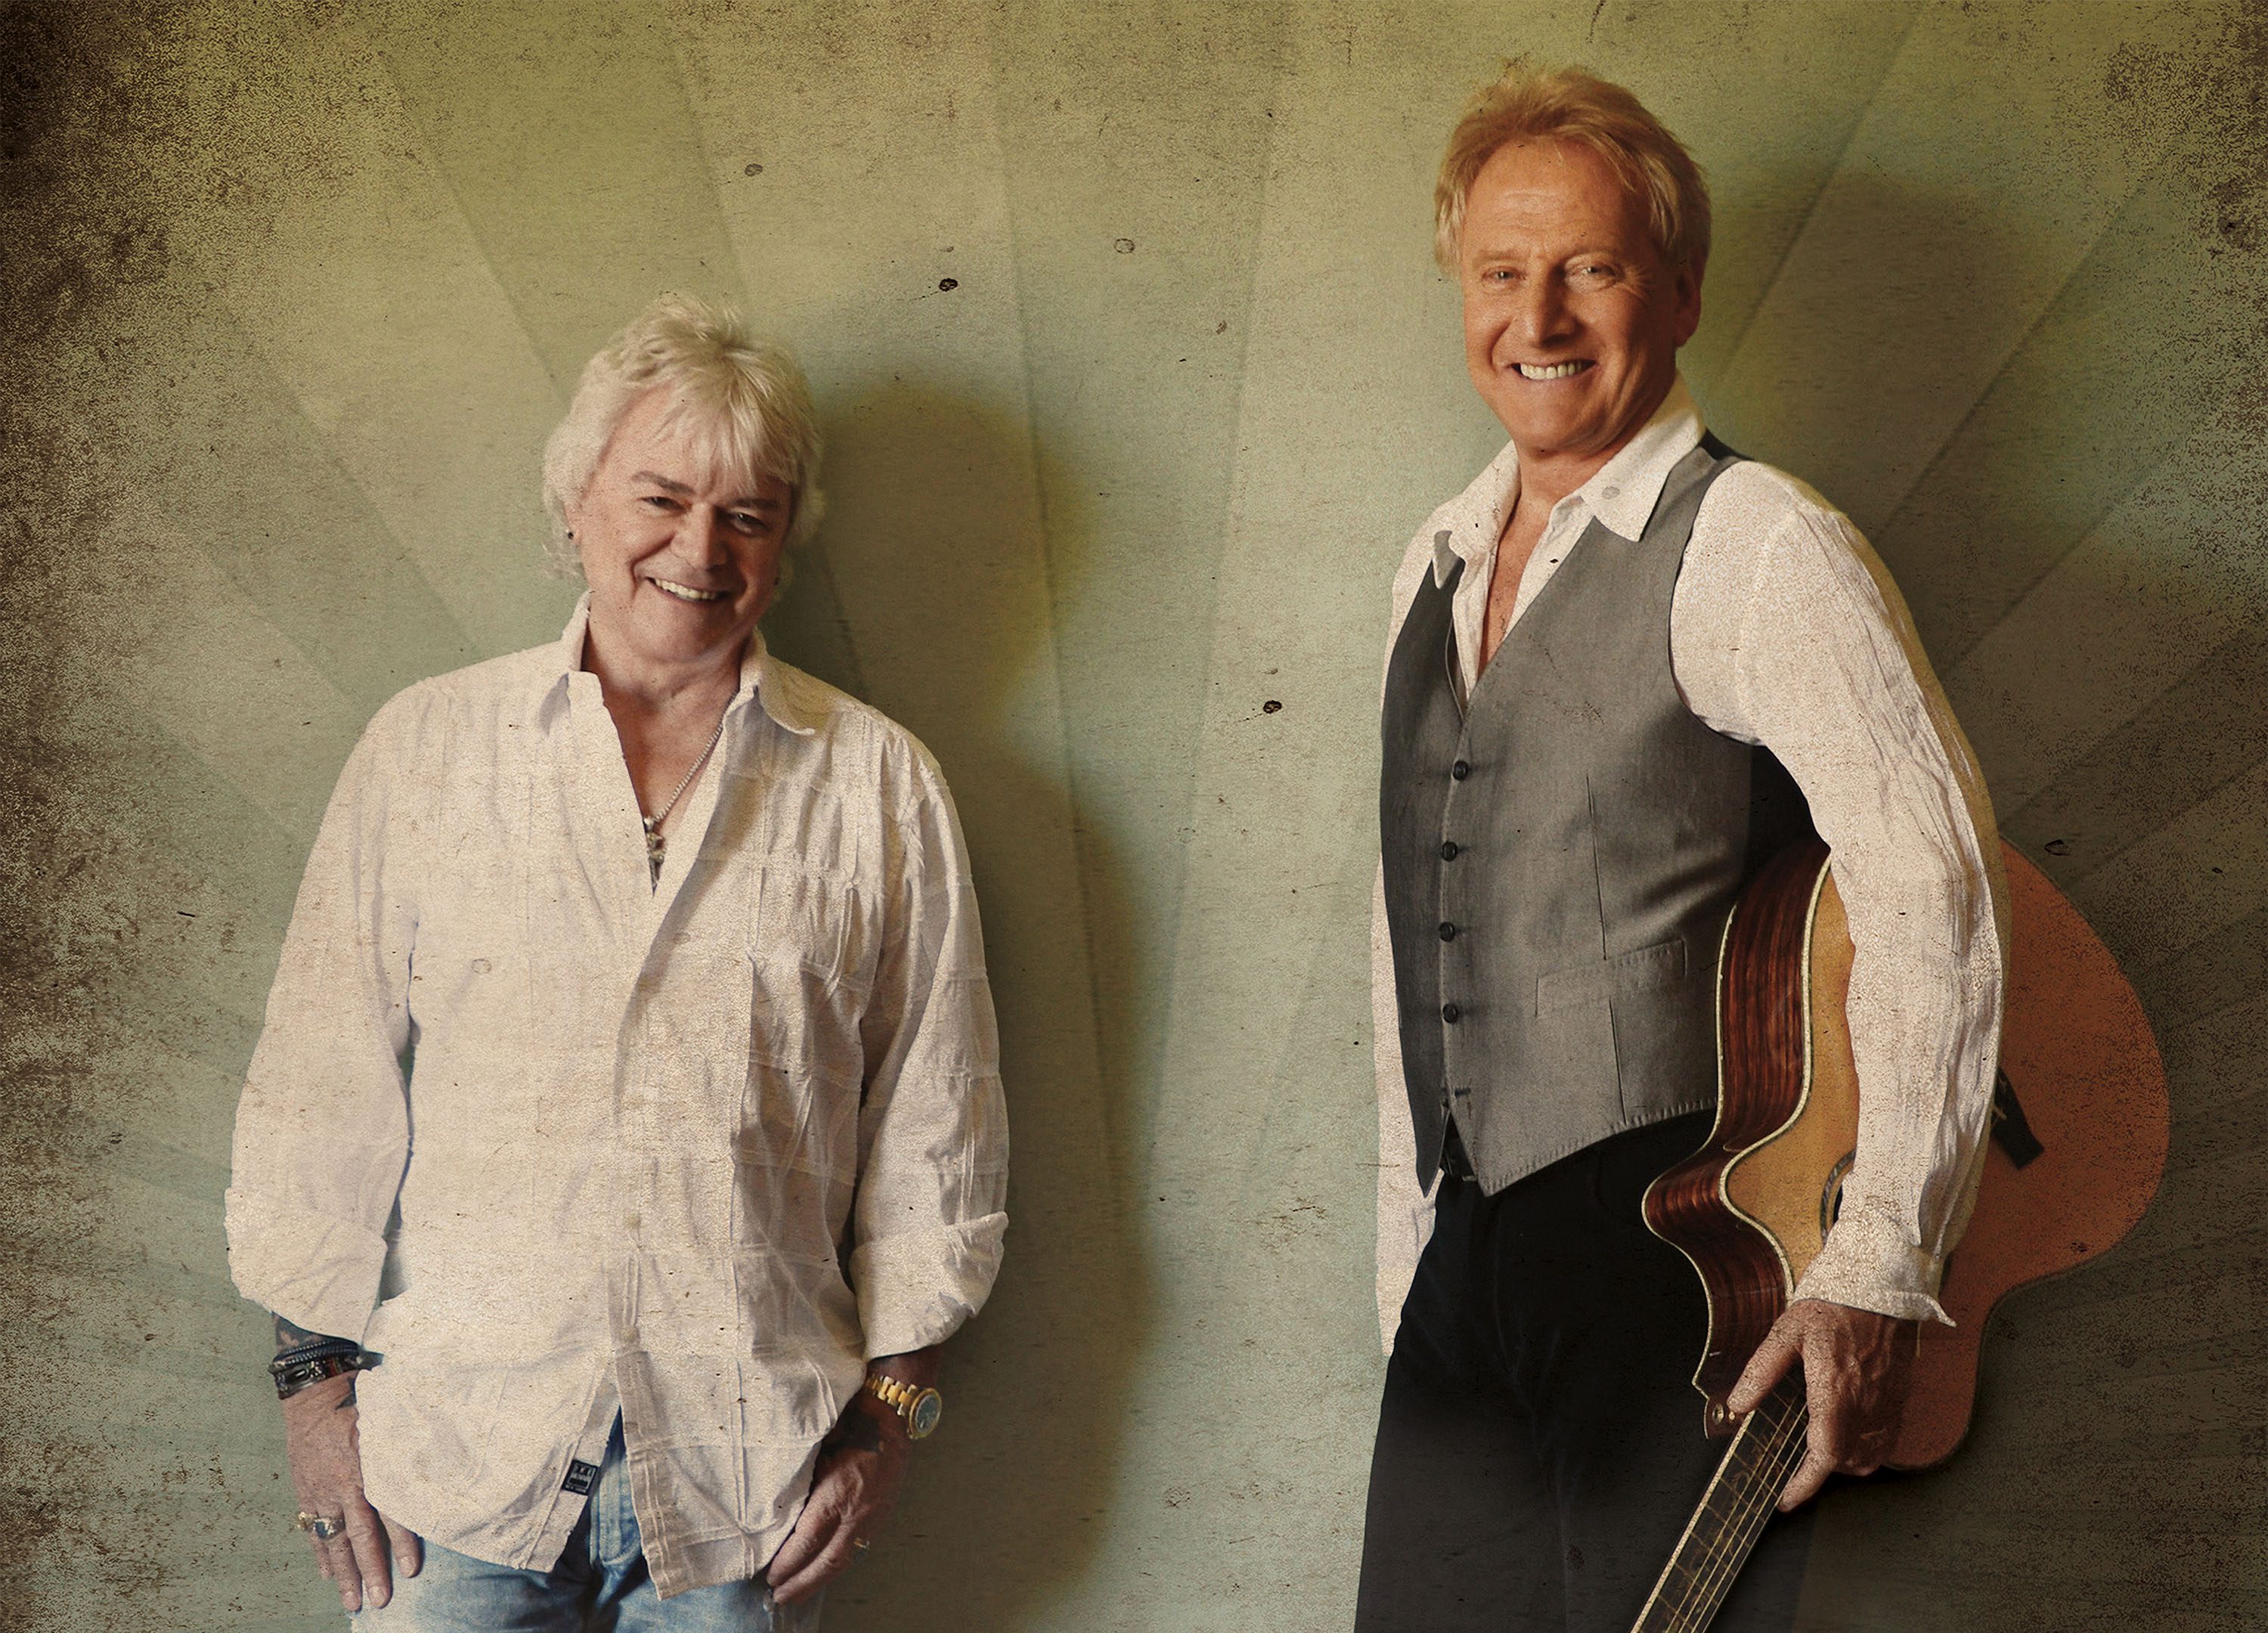 Air Supply, Celtic Women and World Championship Fighting coming to Chumash in 2020